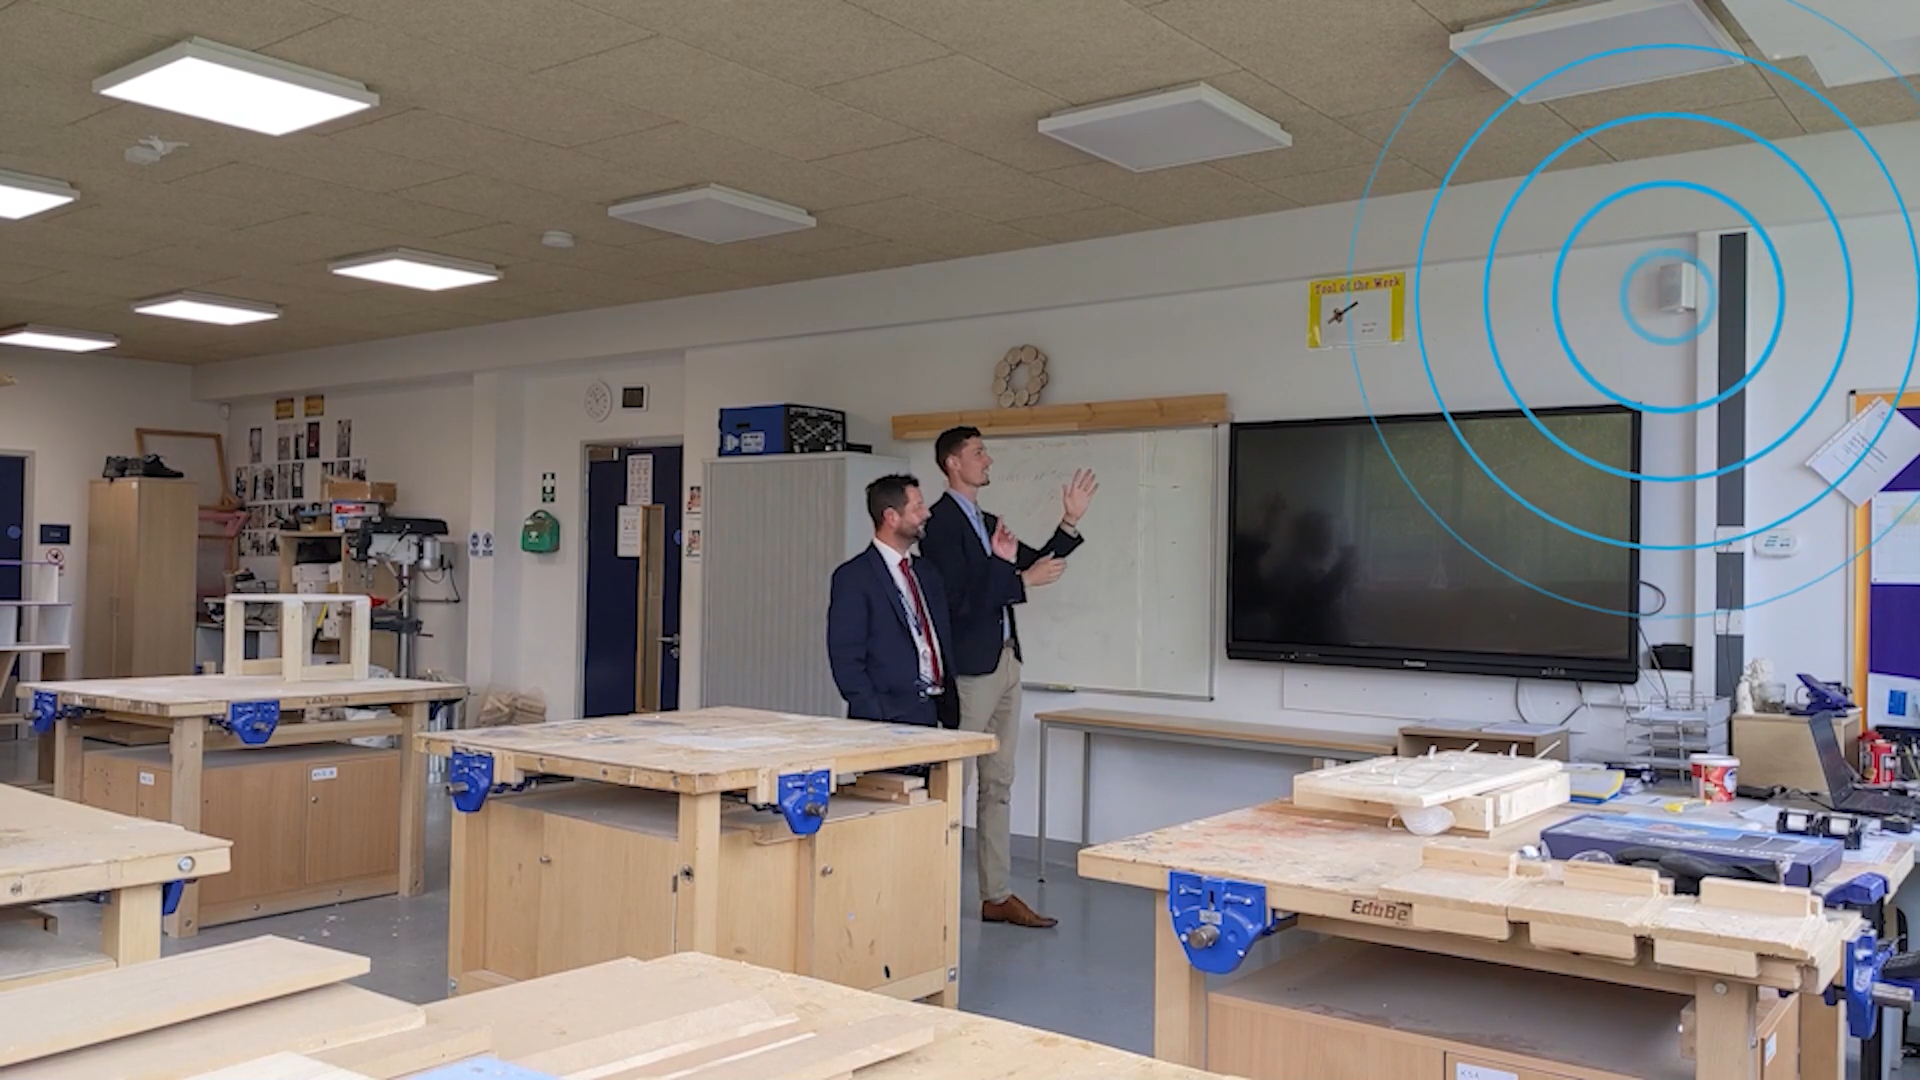 David Bury and Oscar Rowley in a construction workshop at The Heights School, pointing at a speaker installed to address high noise levels.